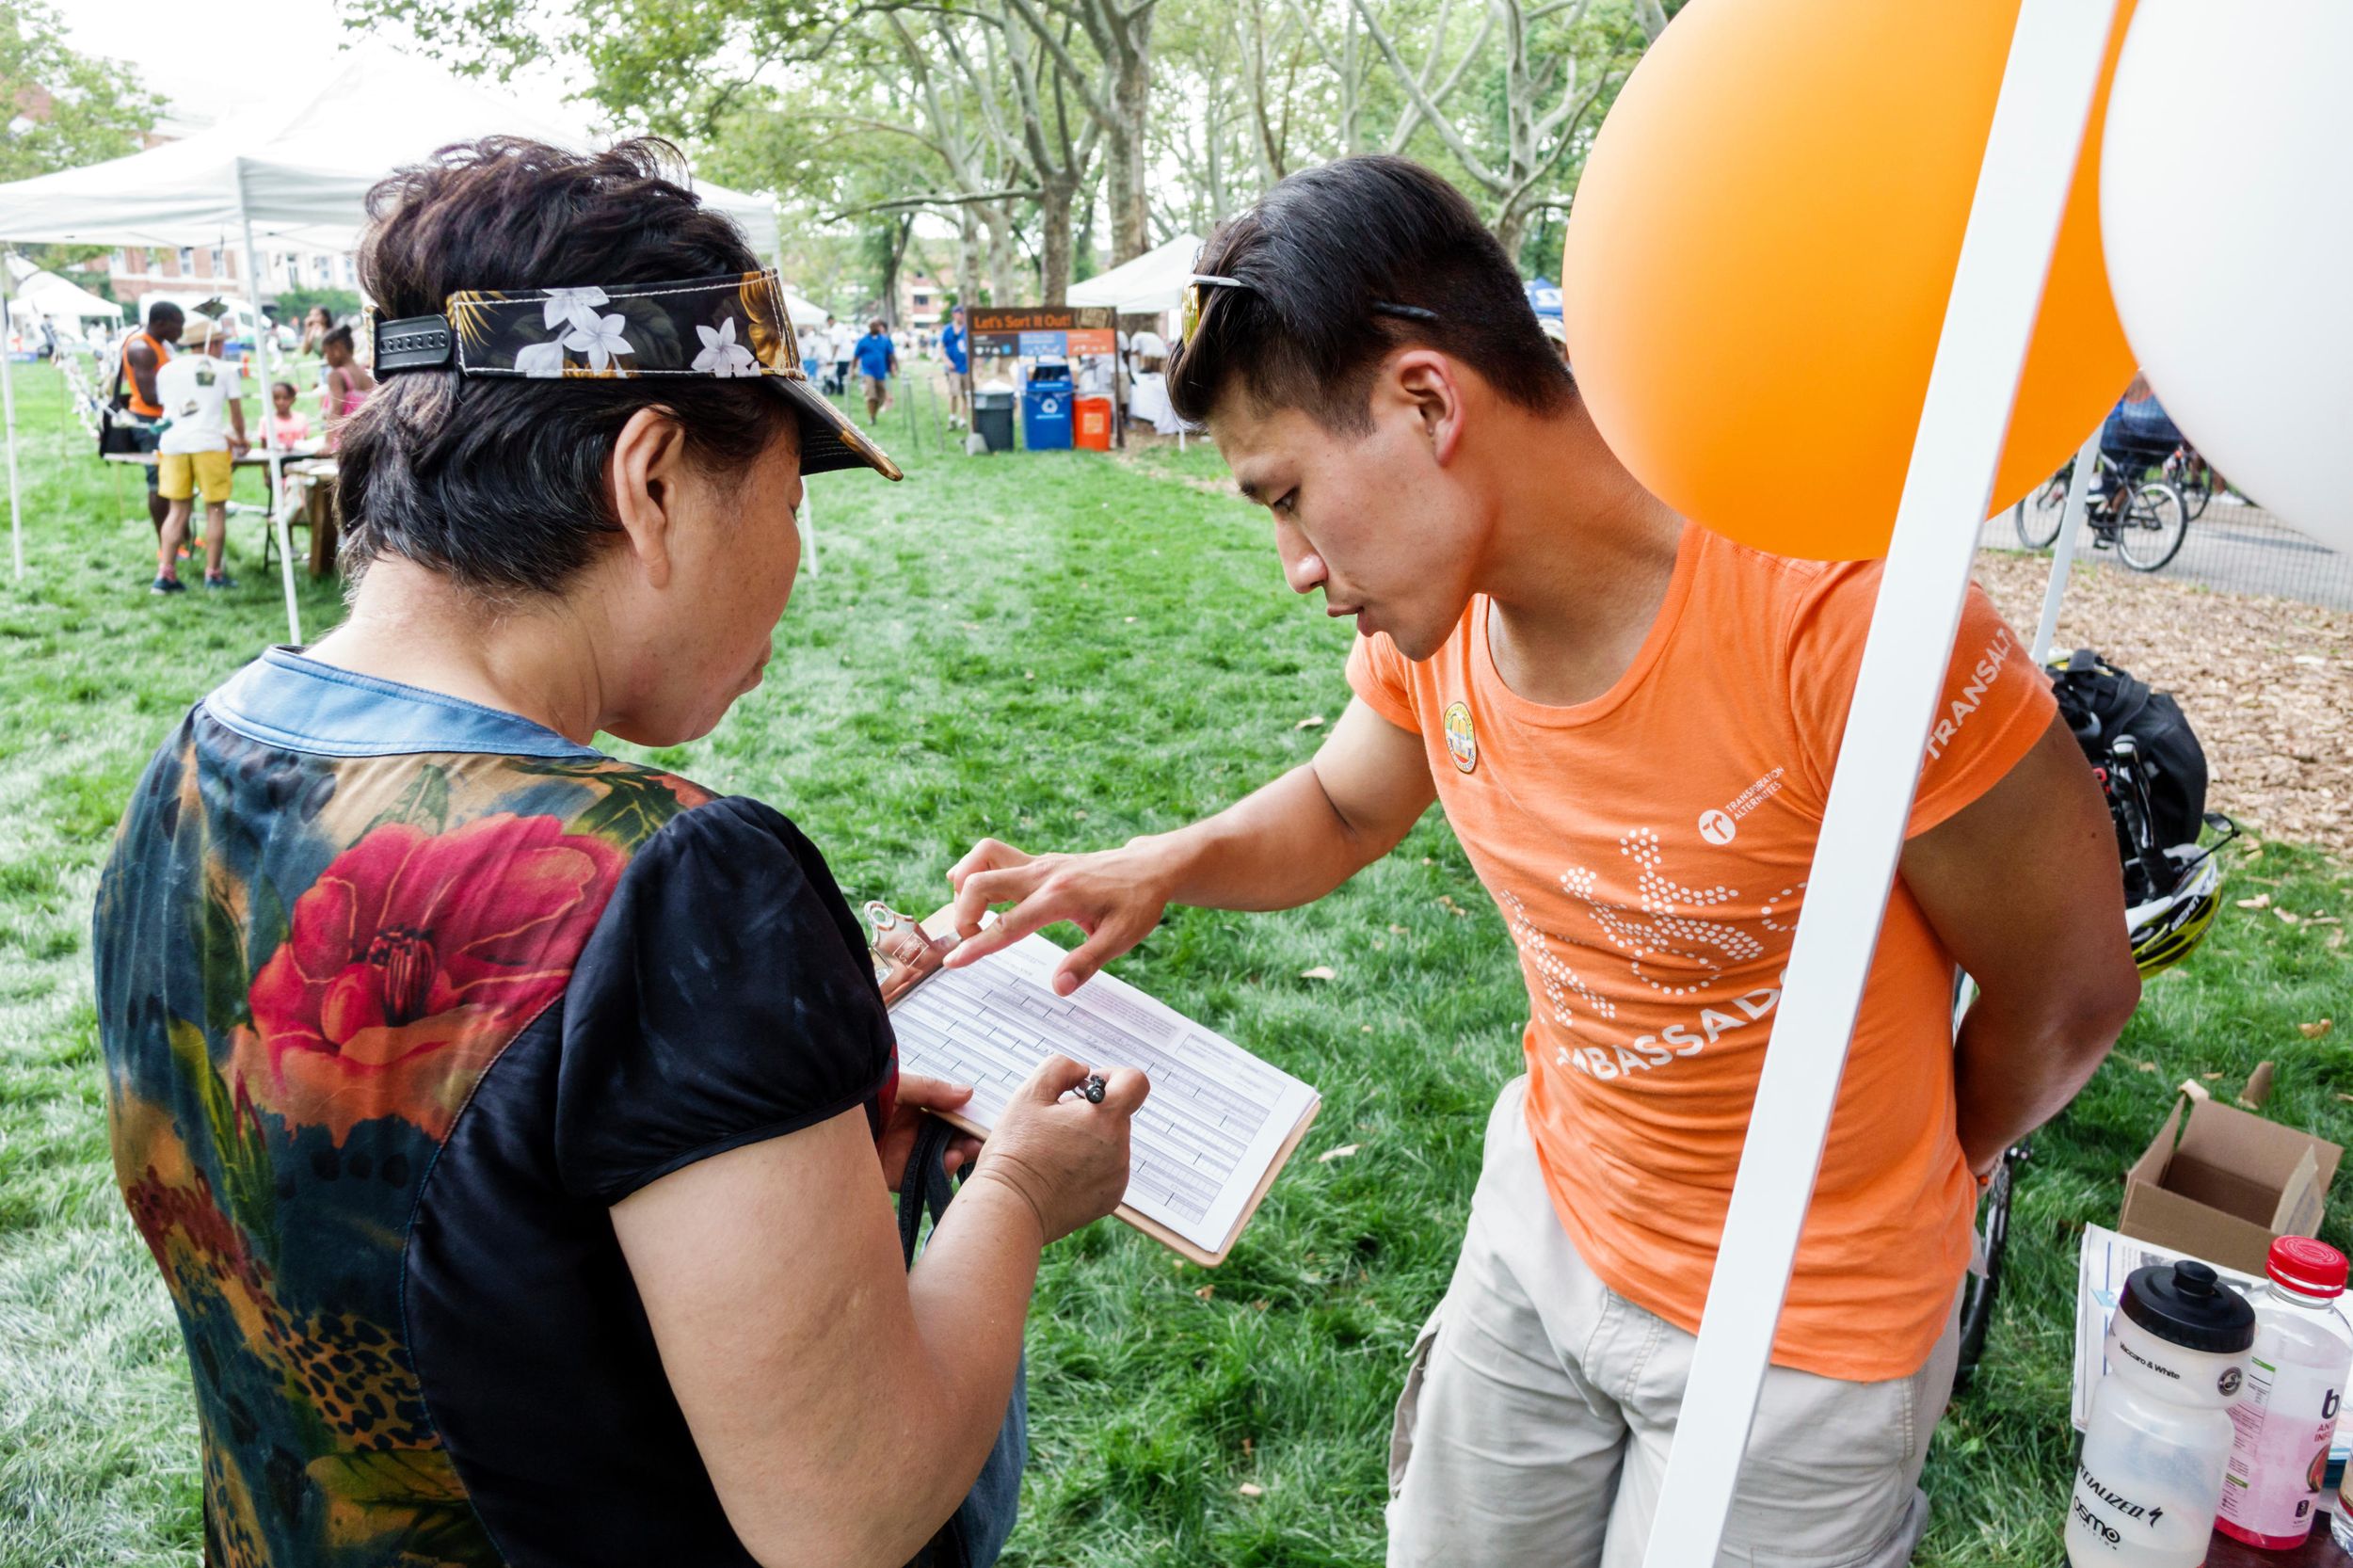 A man helps a woman at City of Water Day in New York in July 16, 2016